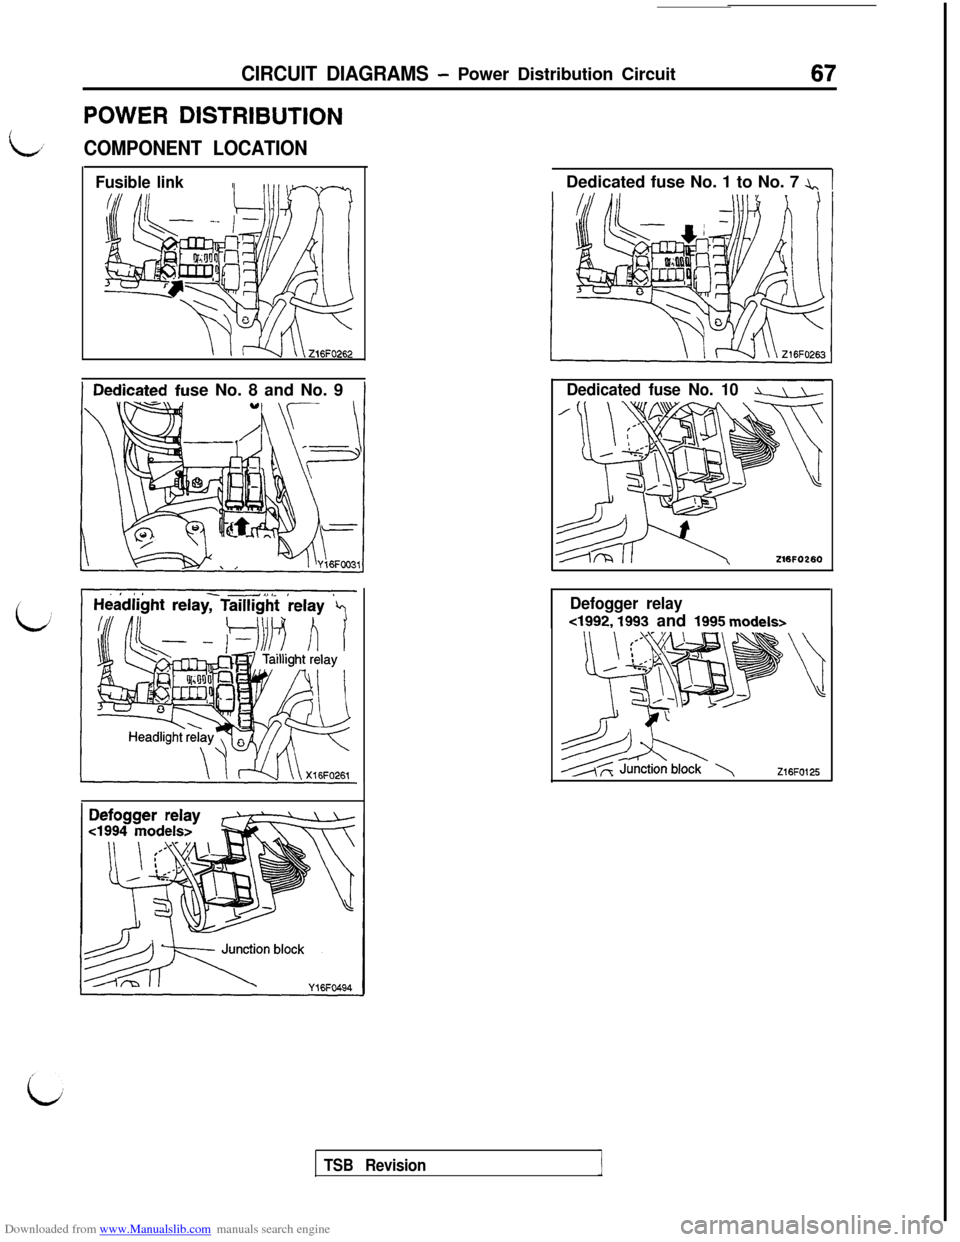 MITSUBISHI 3000GT 1992 2.G Workshop Manual Downloaded from www.Manualslib.com manuals search engine CIRCUIT DIAGRAMS - Power Distribution Circuit67
POWER DISTRIBUTION
L,’COMPONENT LOCATION
Fusible linkse No. 8 and No. 9Dedicated fuse No. 1 t